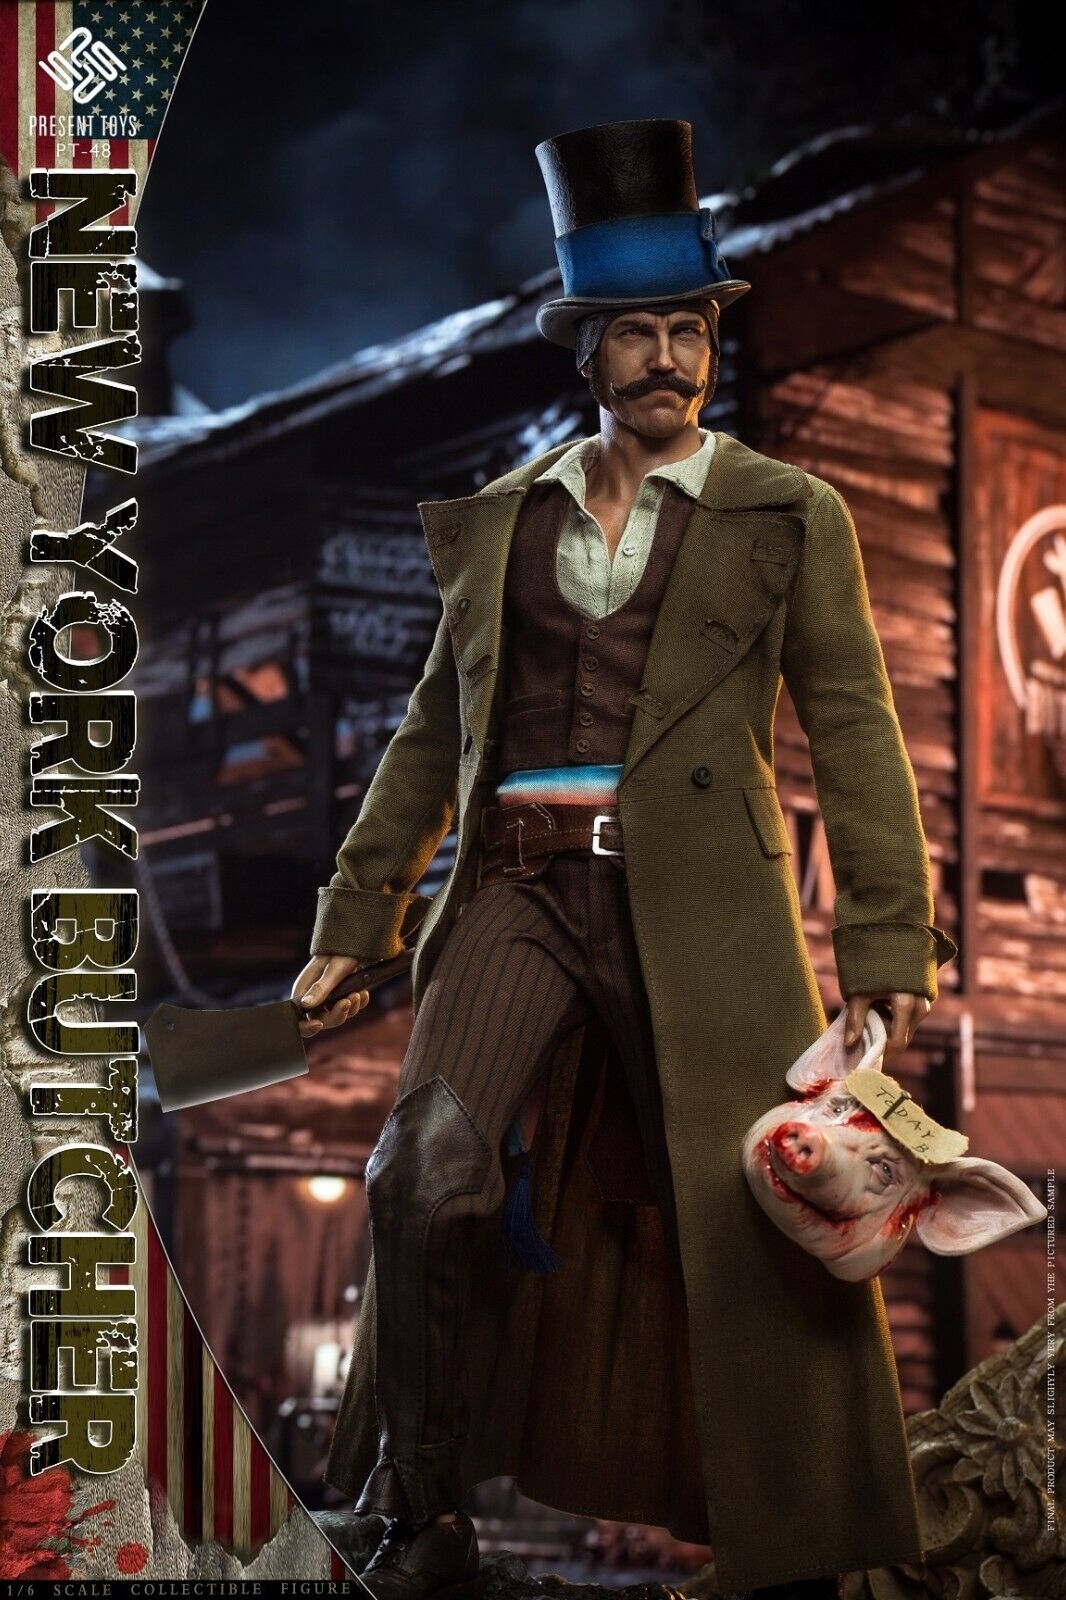 In Stock PRESENT TOYS PT-sp48 1/6 Gangs of New York Bill Butcher Action  Figure